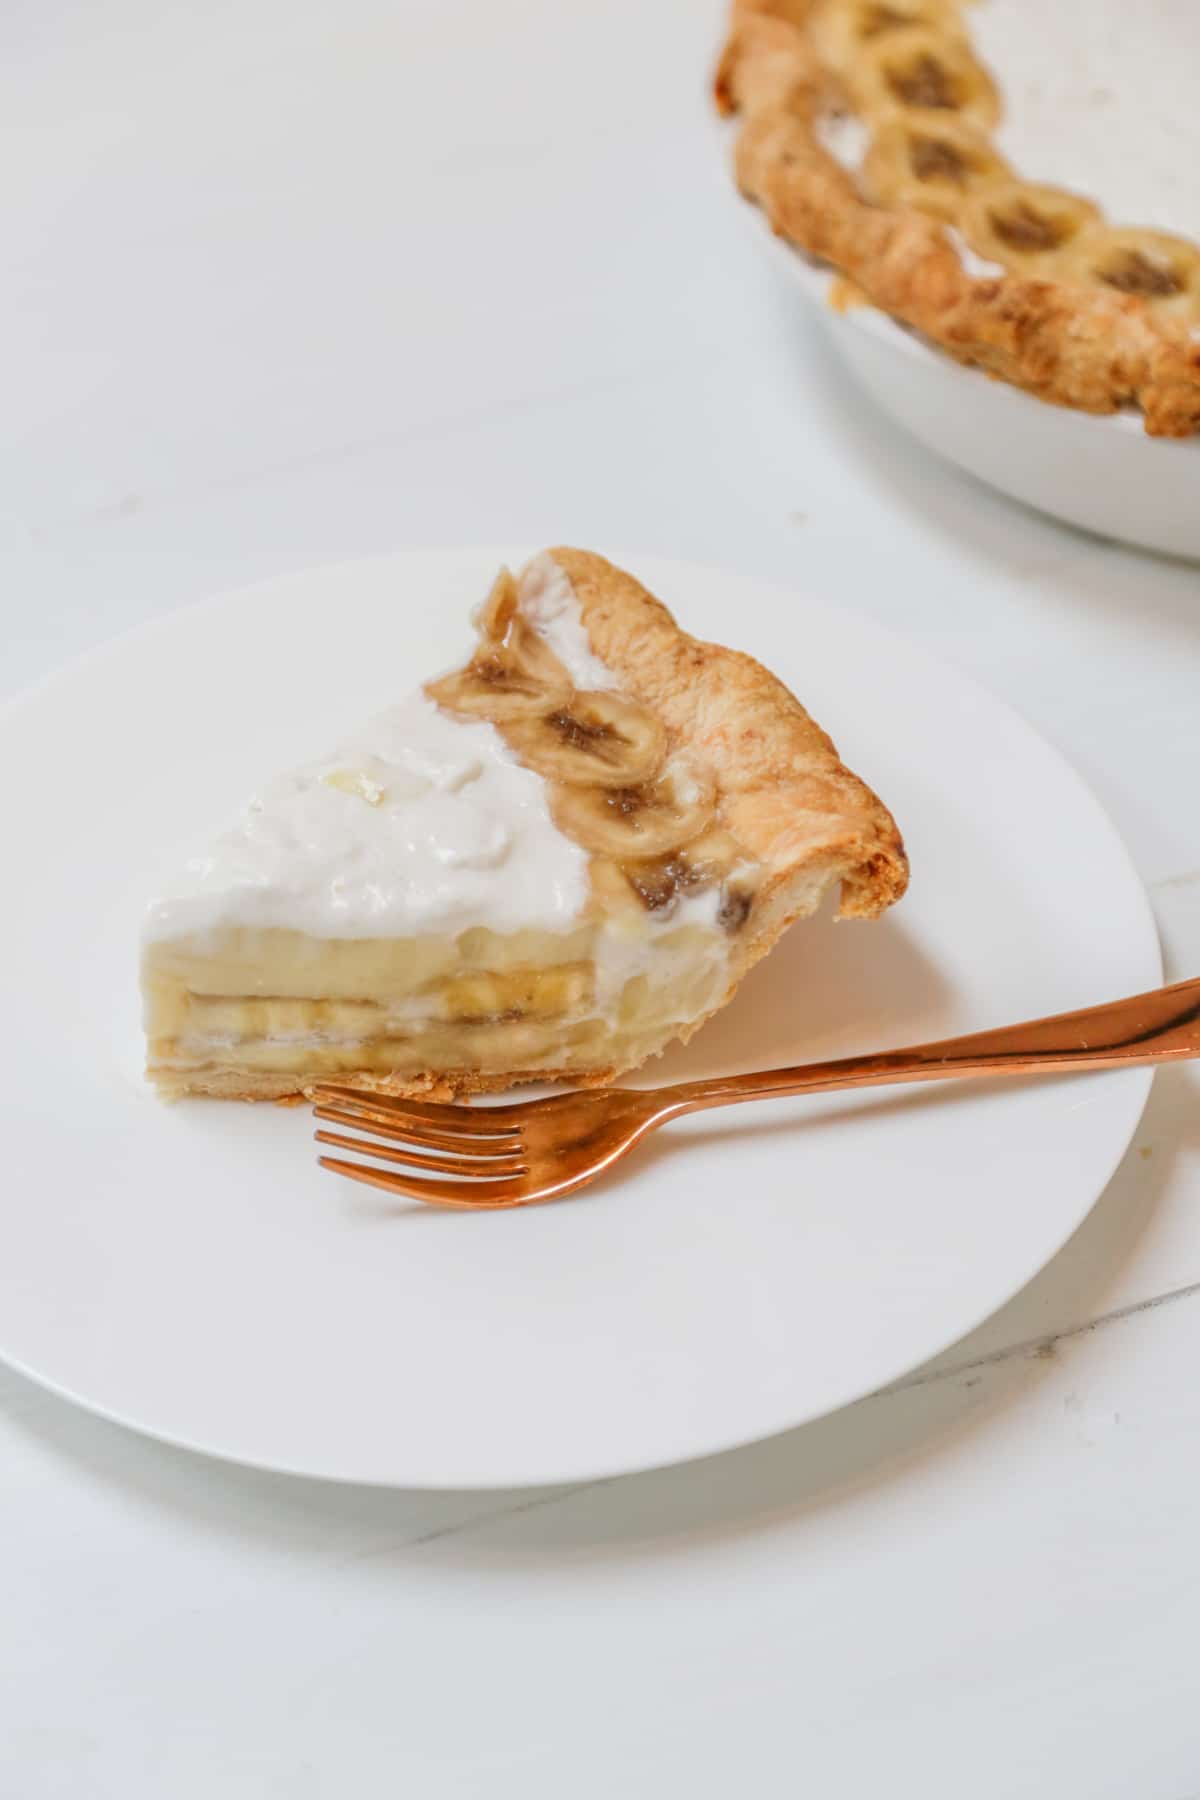 A slice of banana cream pie on a white plate with a copper fork on the plate, and the whole pie in the background.